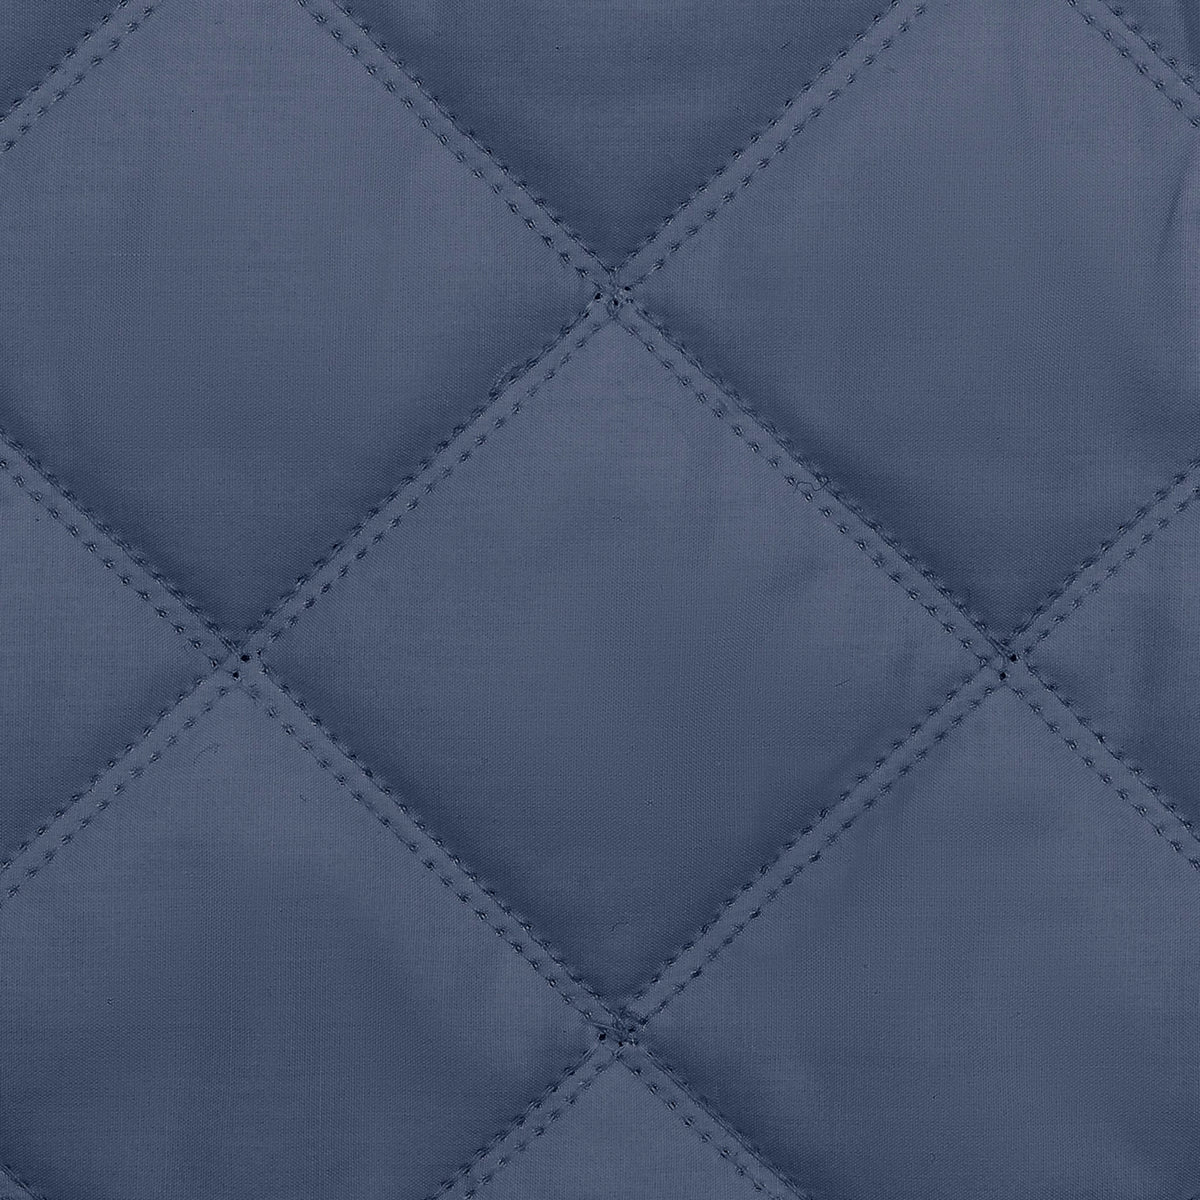 Swatch Sample of Matouk Milano Quilt Bedding in Color Steel Blue